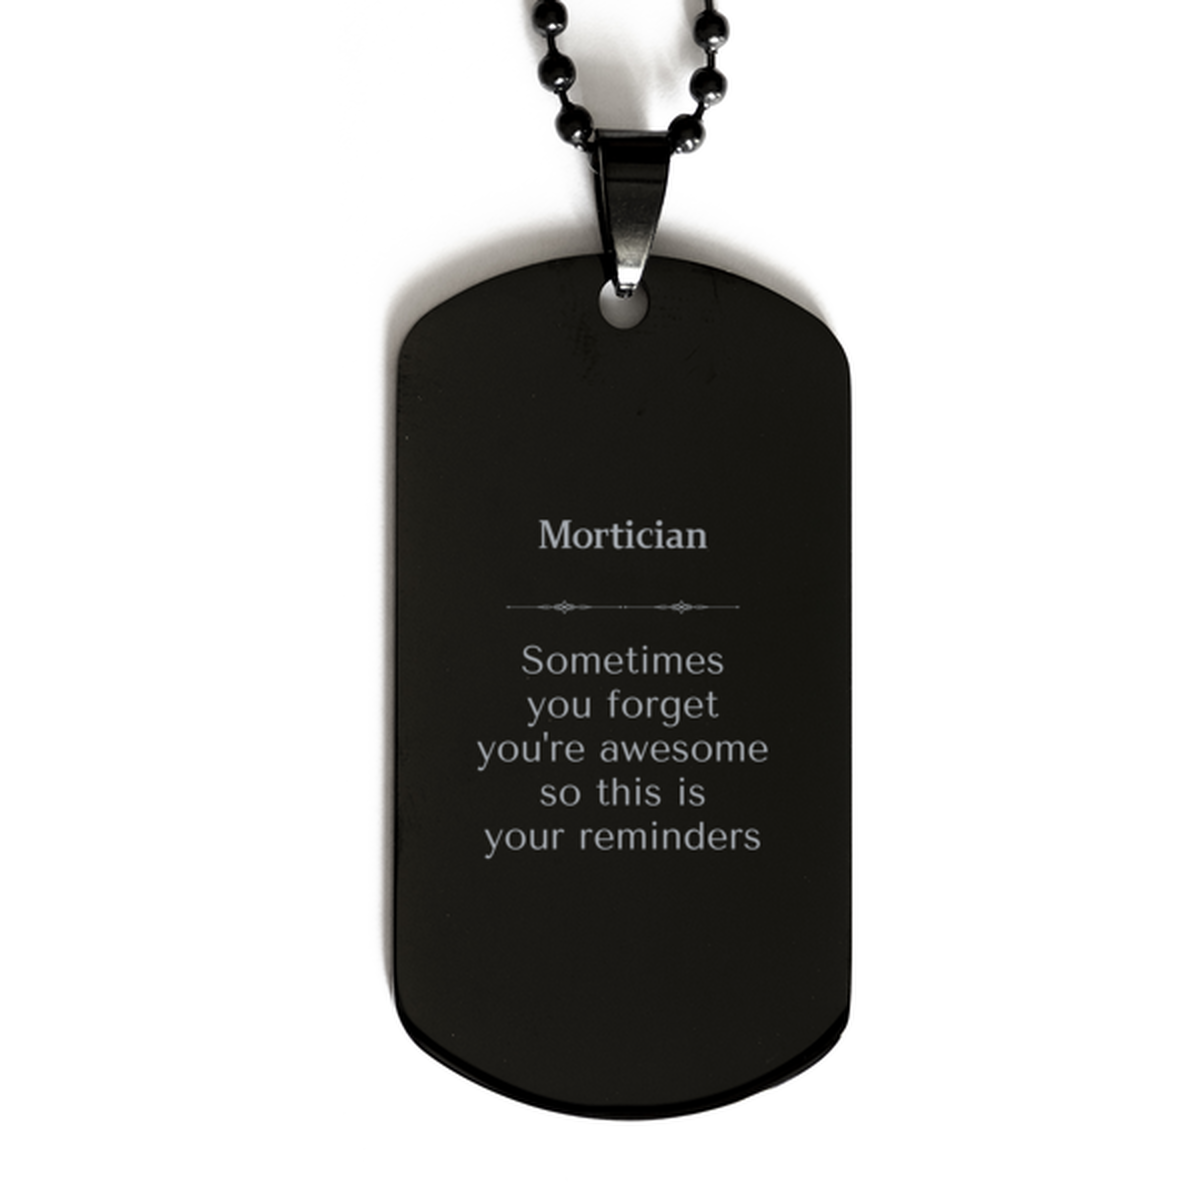 Sentimental Mortician Black Dog Tag, Mortician Sometimes you forget you're awesome so this is your reminders, Graduation Christmas Birthday Gifts for Mortician, Men, Women, Coworkers